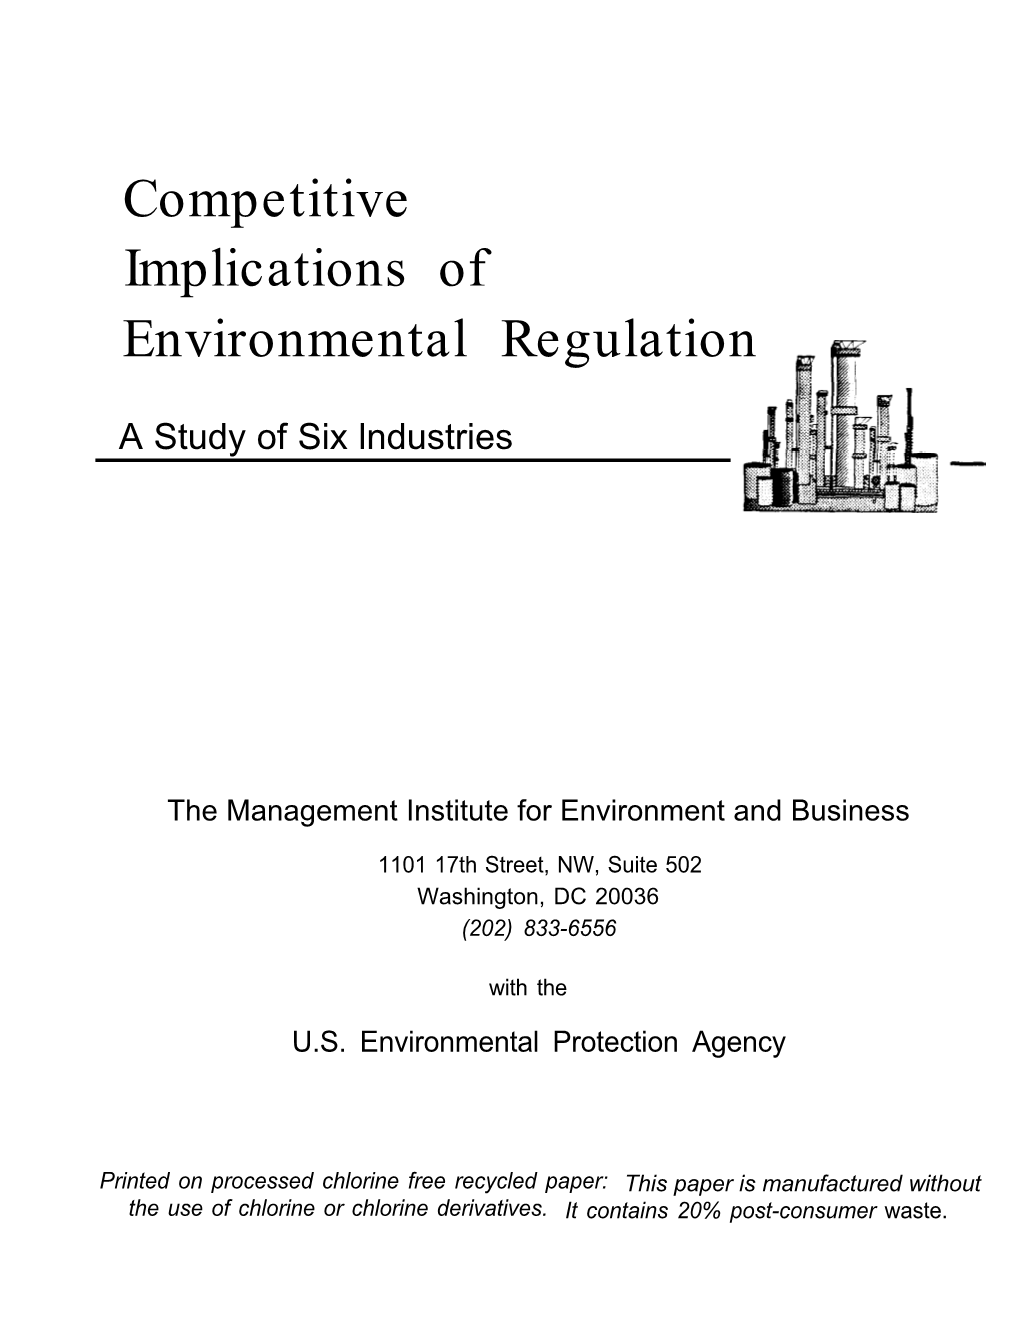 Competitive Implications of Environmental Regulation